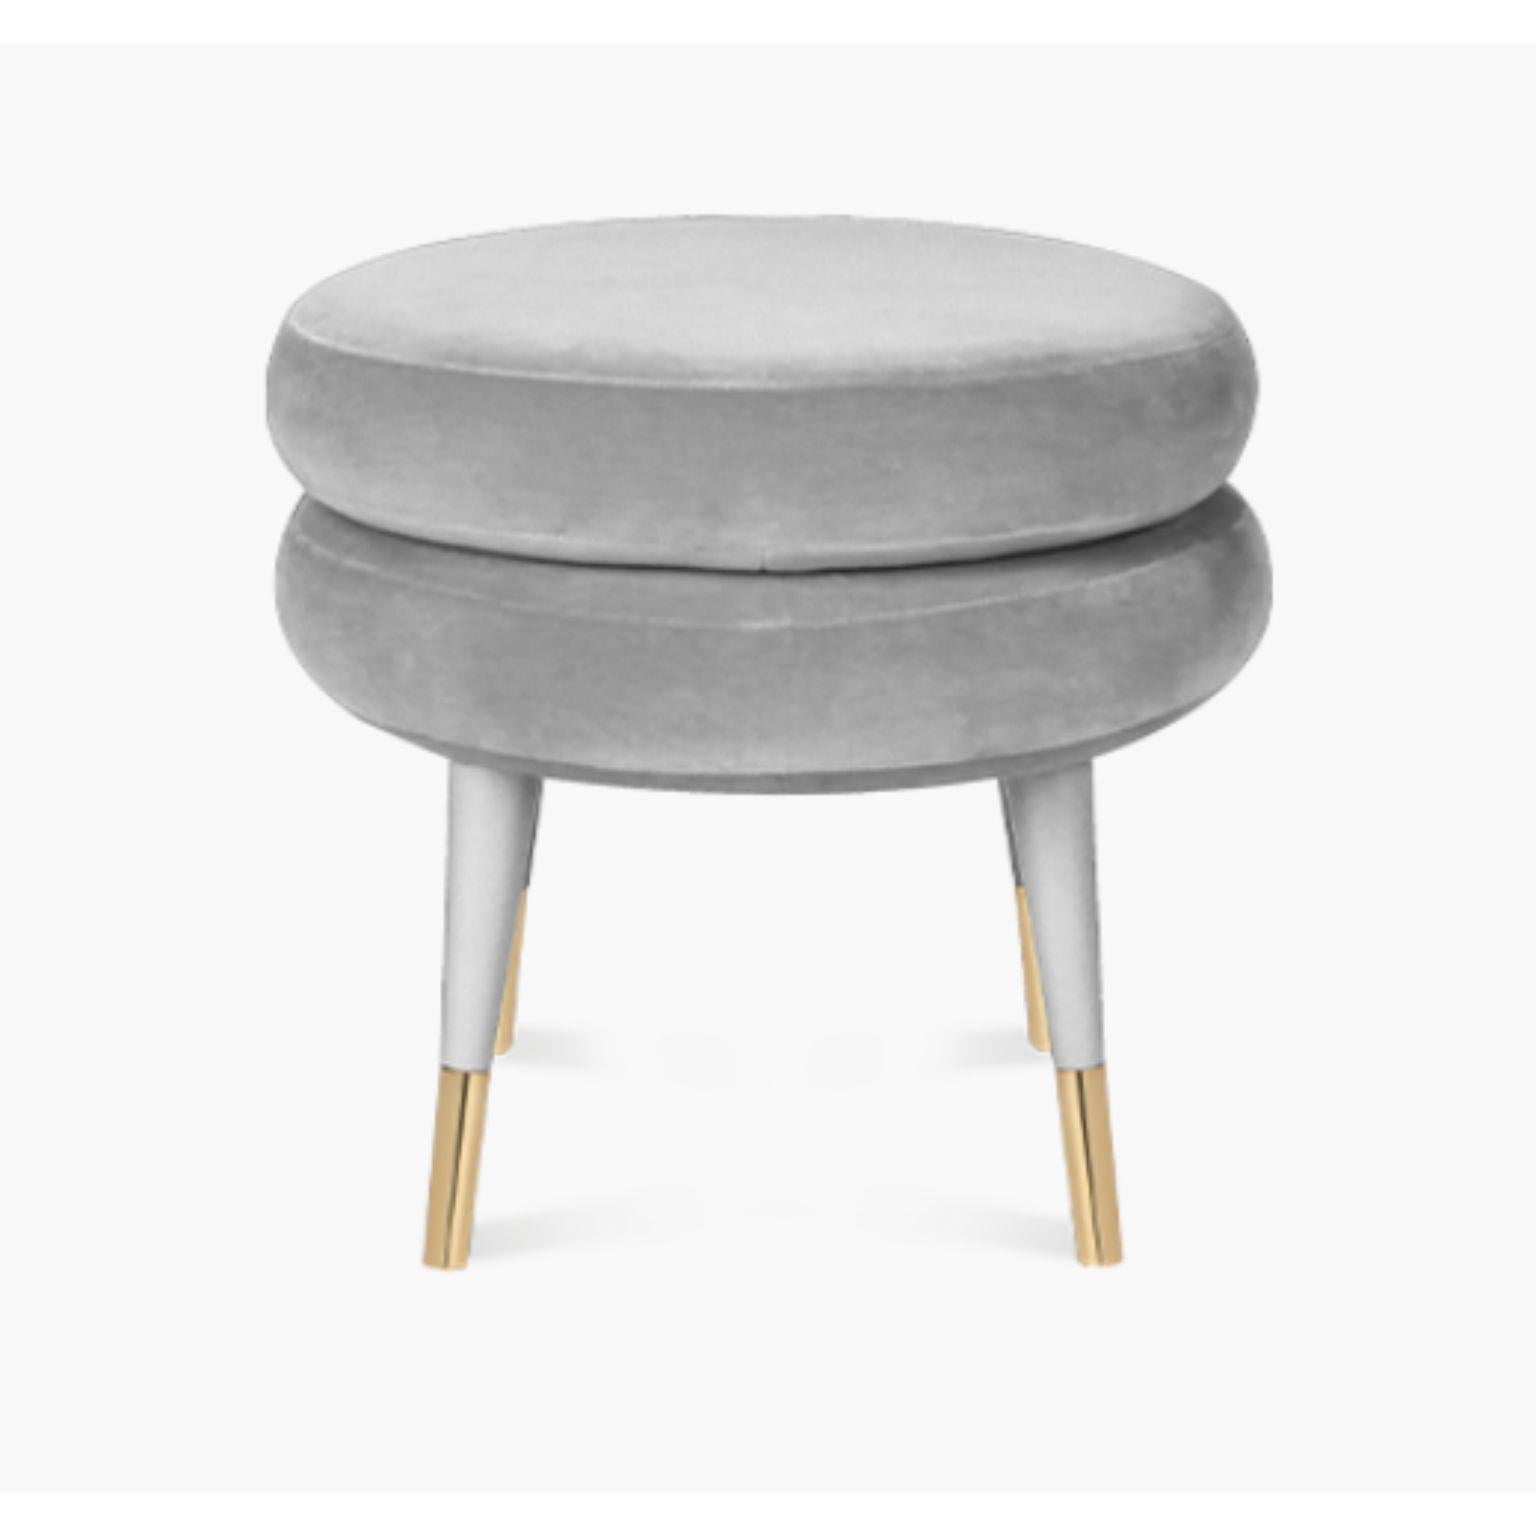 Marshmallow stool, Royal Stranger
Dimensions: 45 x 50 x 50 cm
Materials: Upholstery Platinum cotton velvet.
Legs Platinum lacquered wood with matte finish.
Feet covers brushed brass.

Royal Stranger is an exclusive furniture brand determined